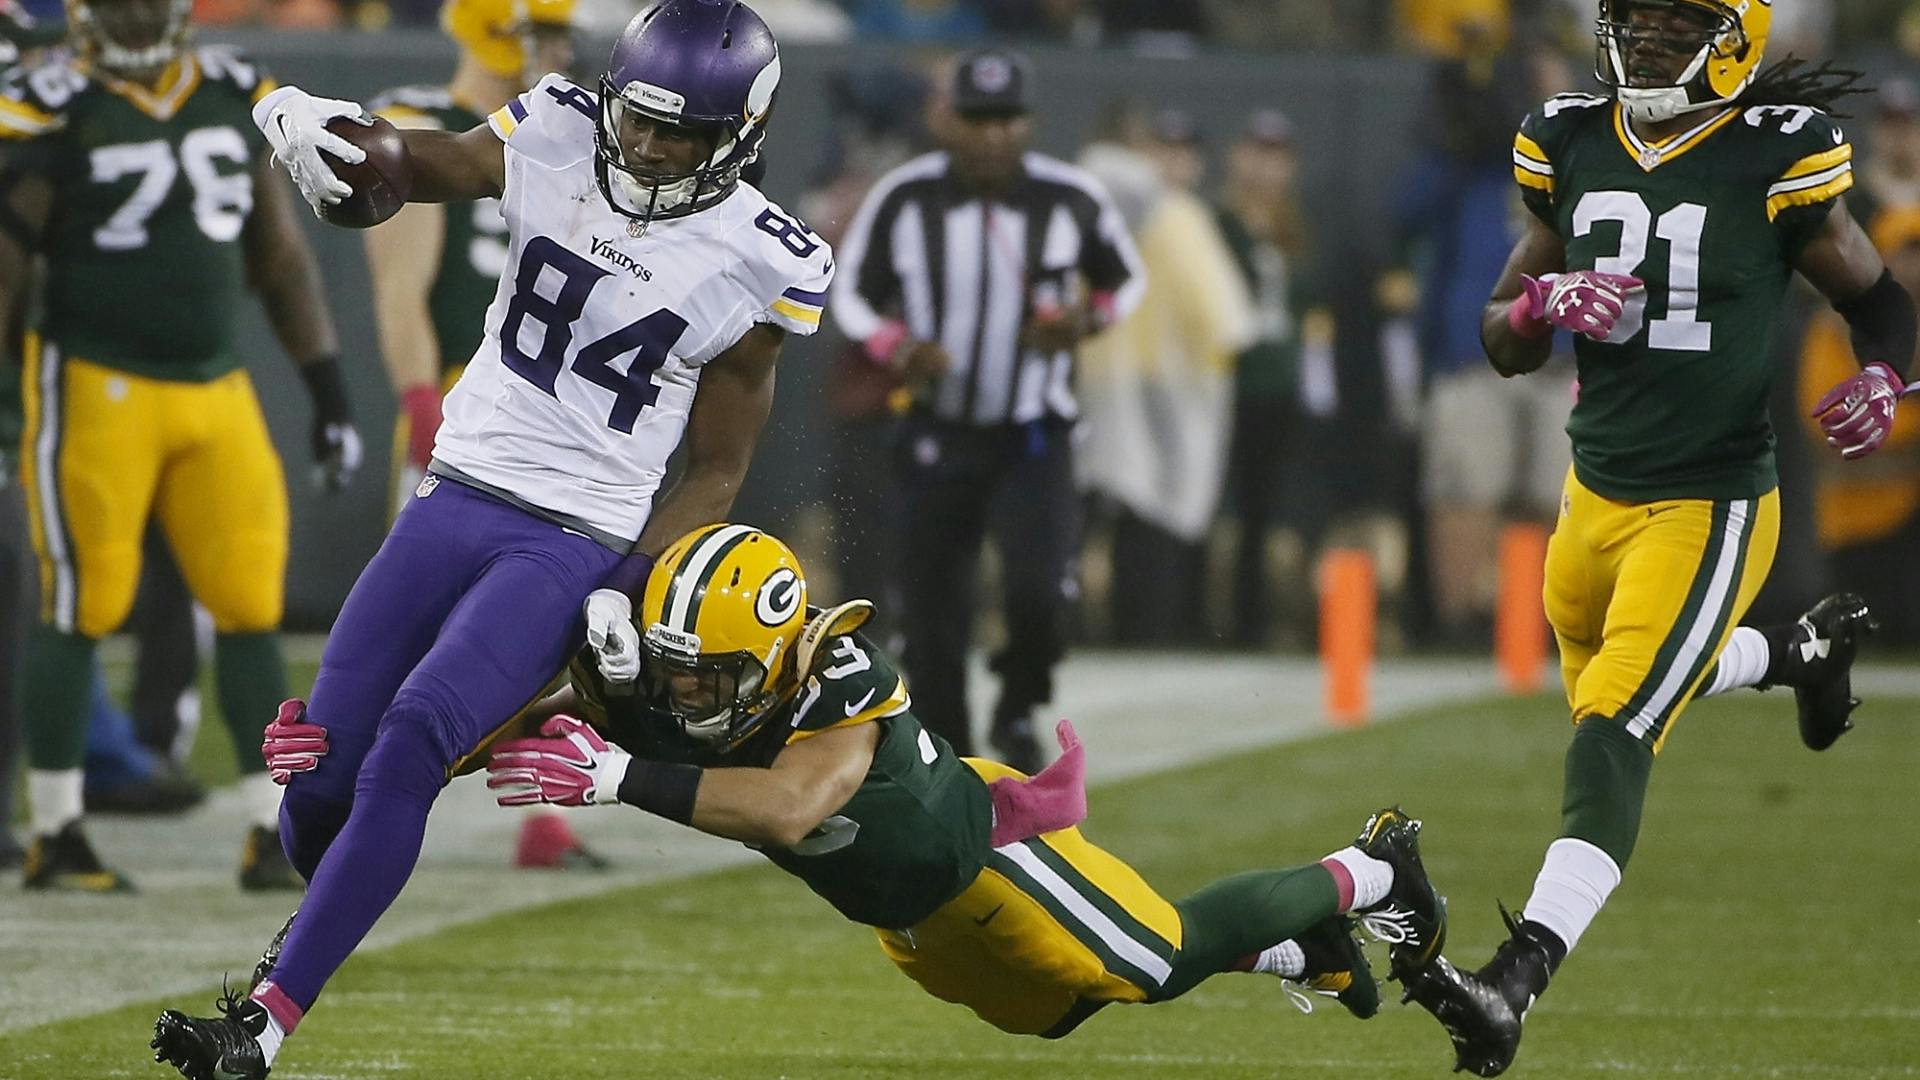 One way or another, the Vikings offense, built around Adrian Peterson, has got to find a way to get the ball to wide receiver Cordarrelle Patterson